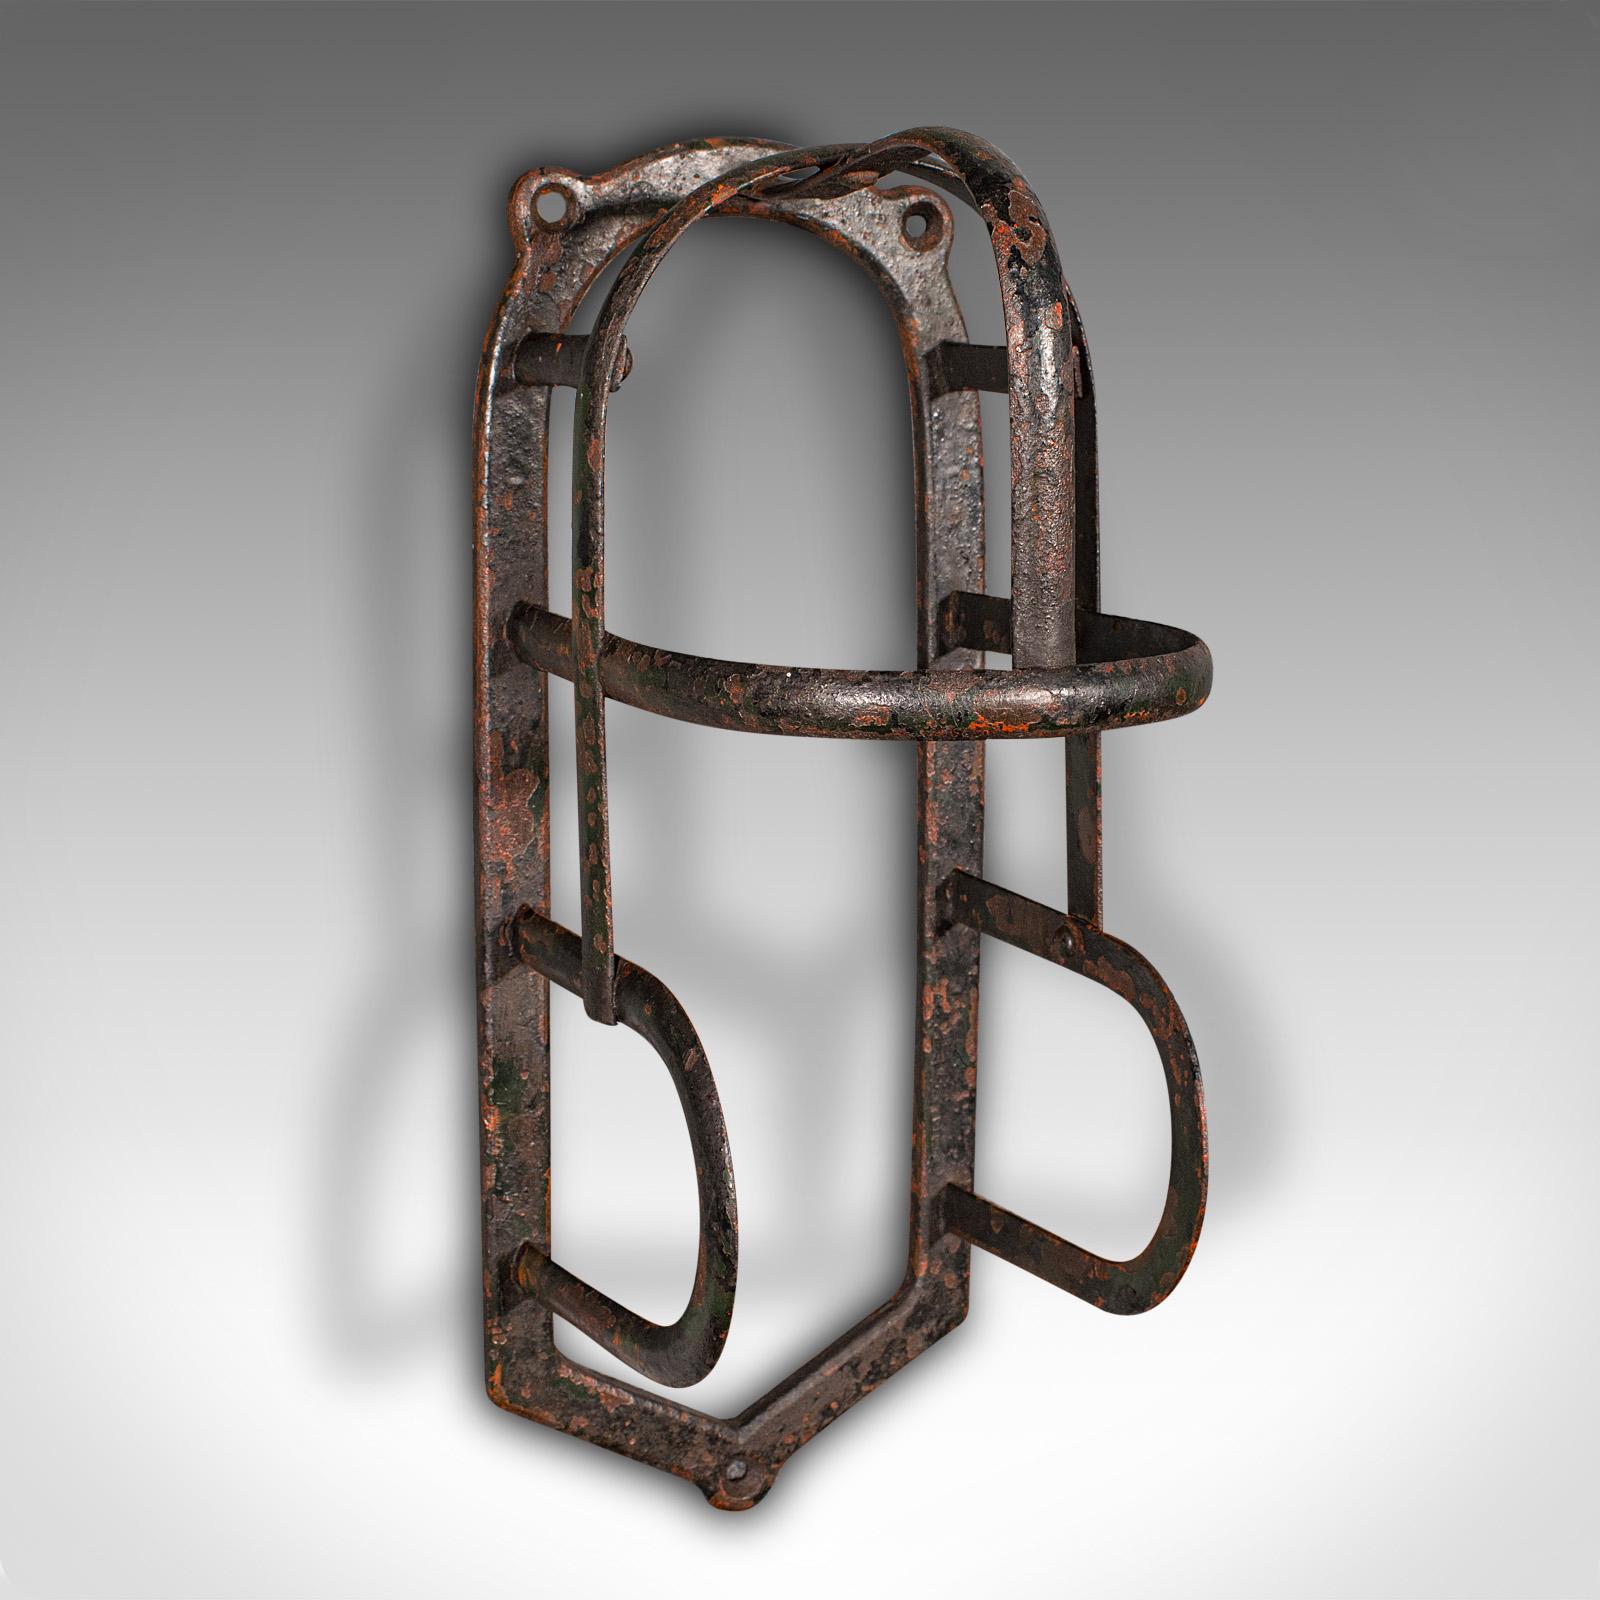 19th Century Pair Of Antique Equestrian Tack Rests, English Iron, Stables, Outdoor, Victorian For Sale